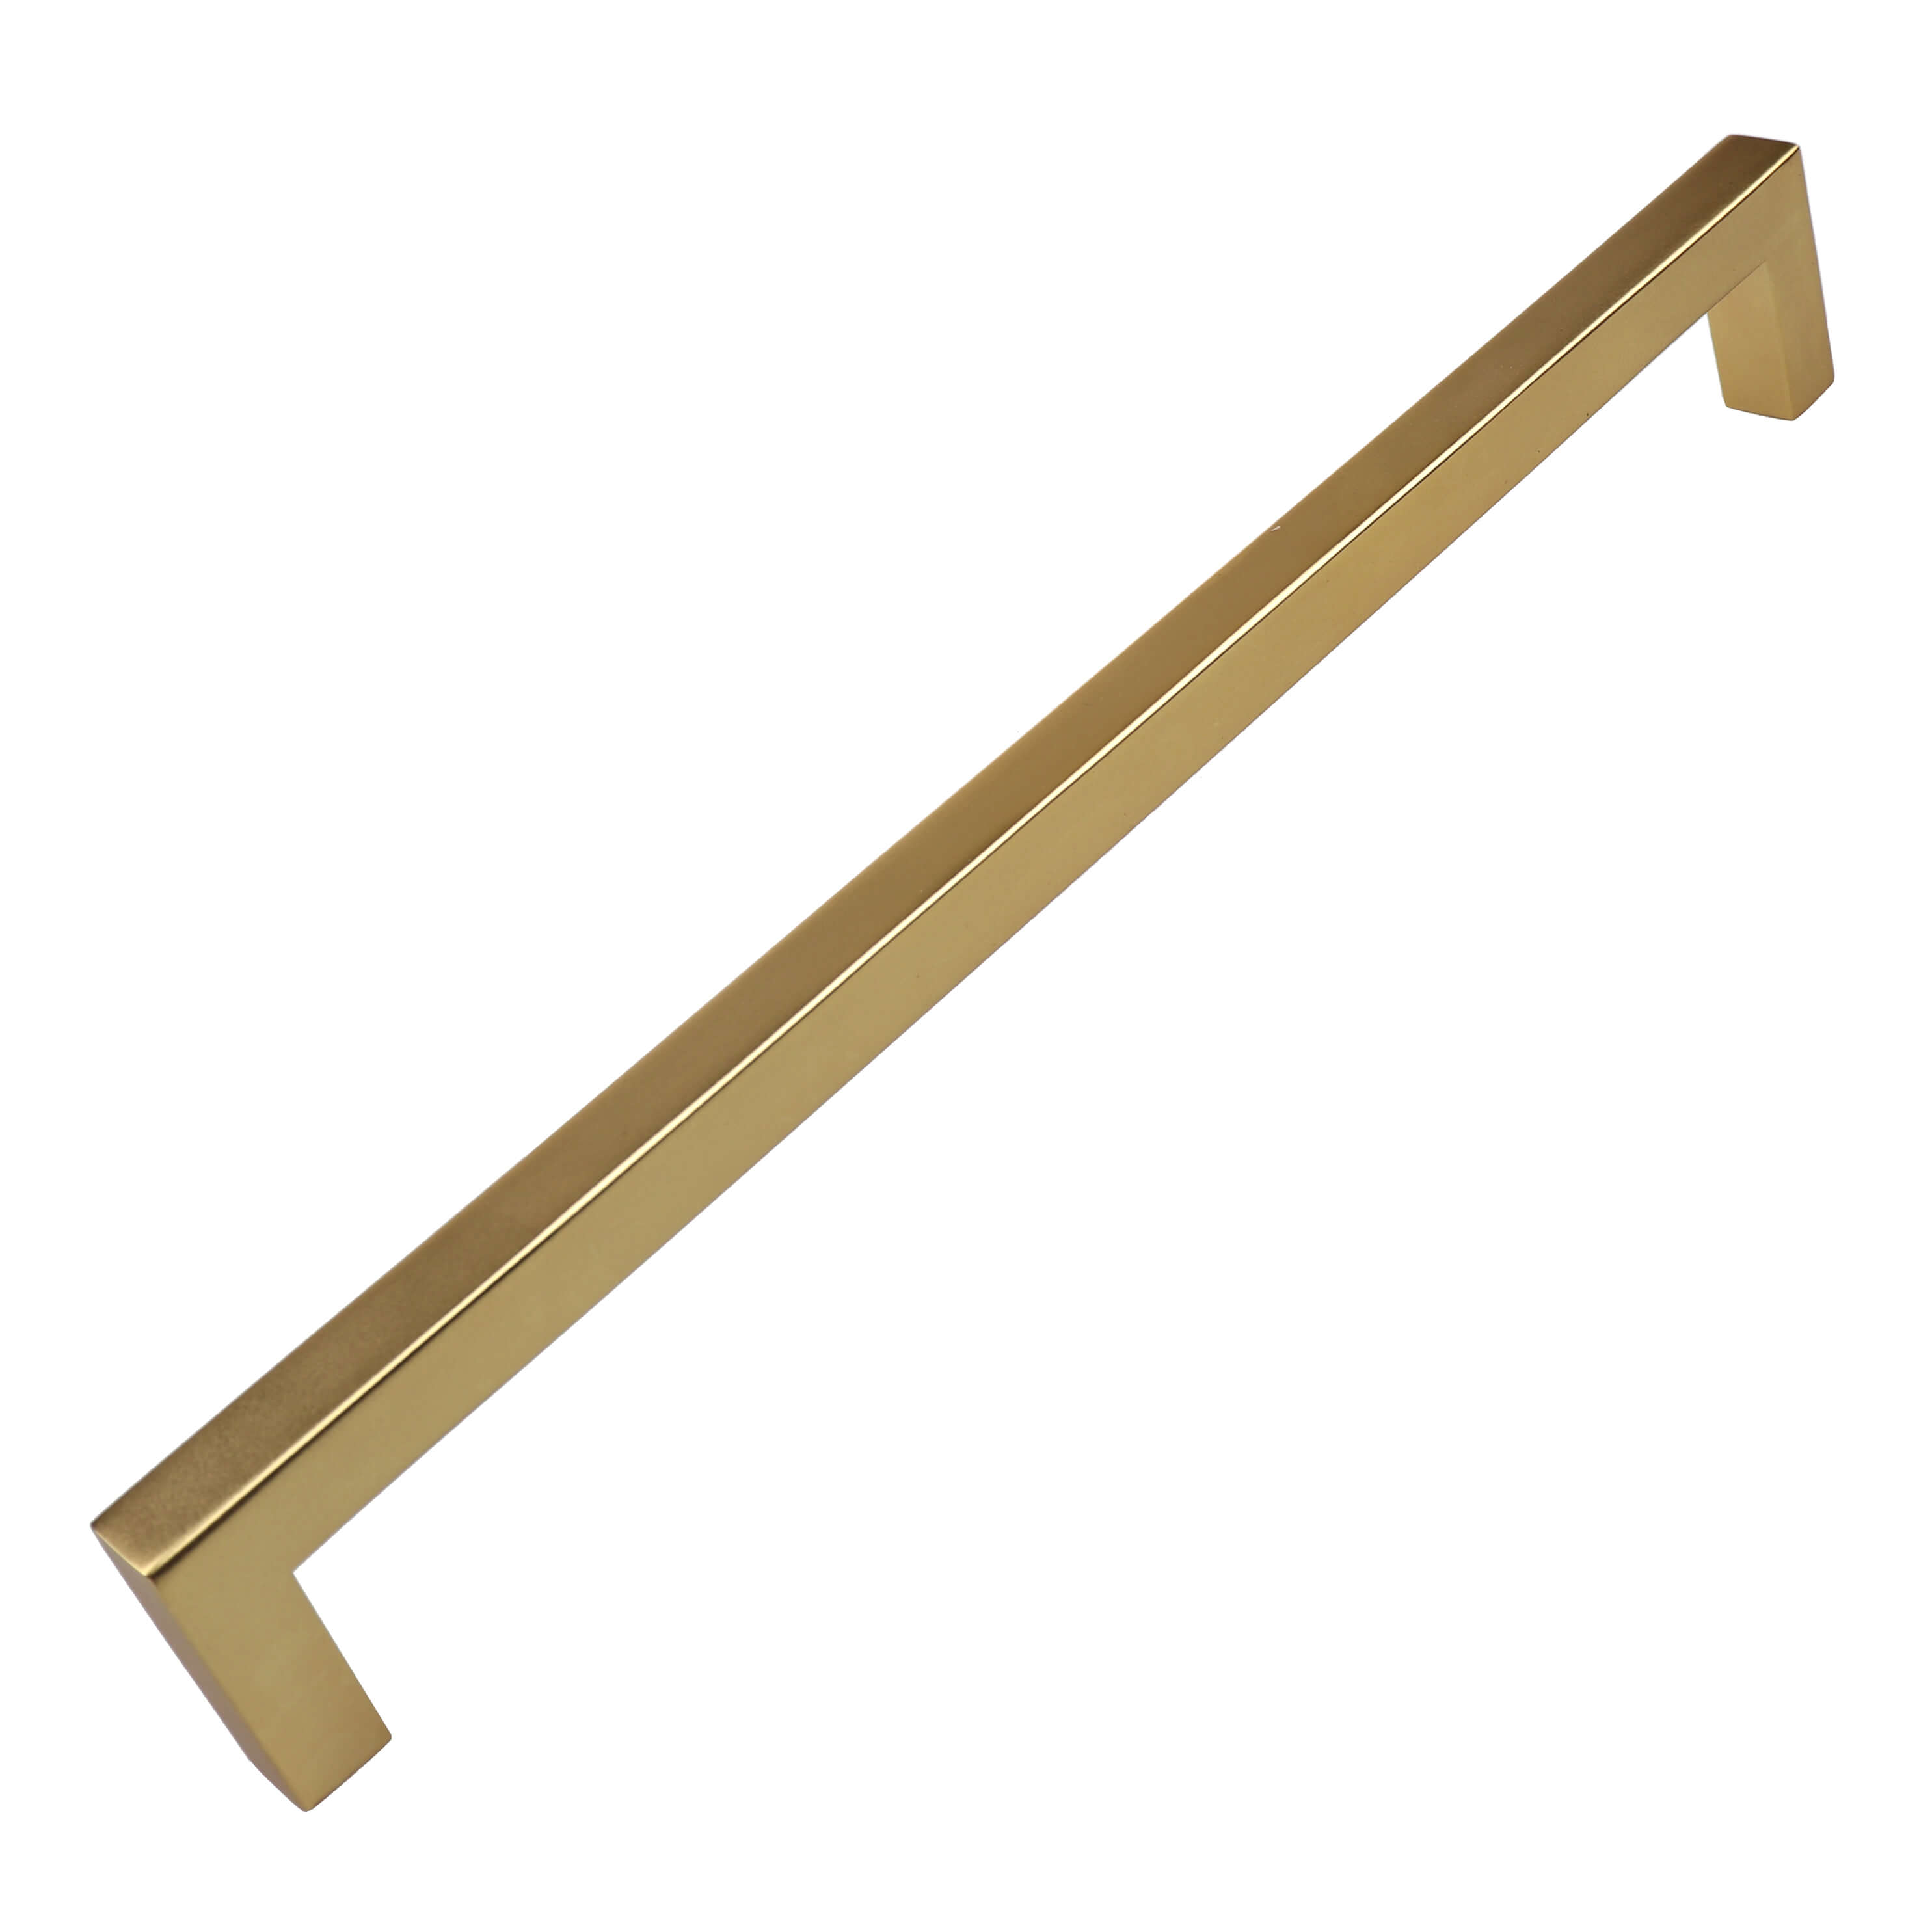 GlideRite 8-3/4 in. Center Solid Square Bar Cabinet Pulls, Brass Gold, Pack of 10 - image 1 of 3